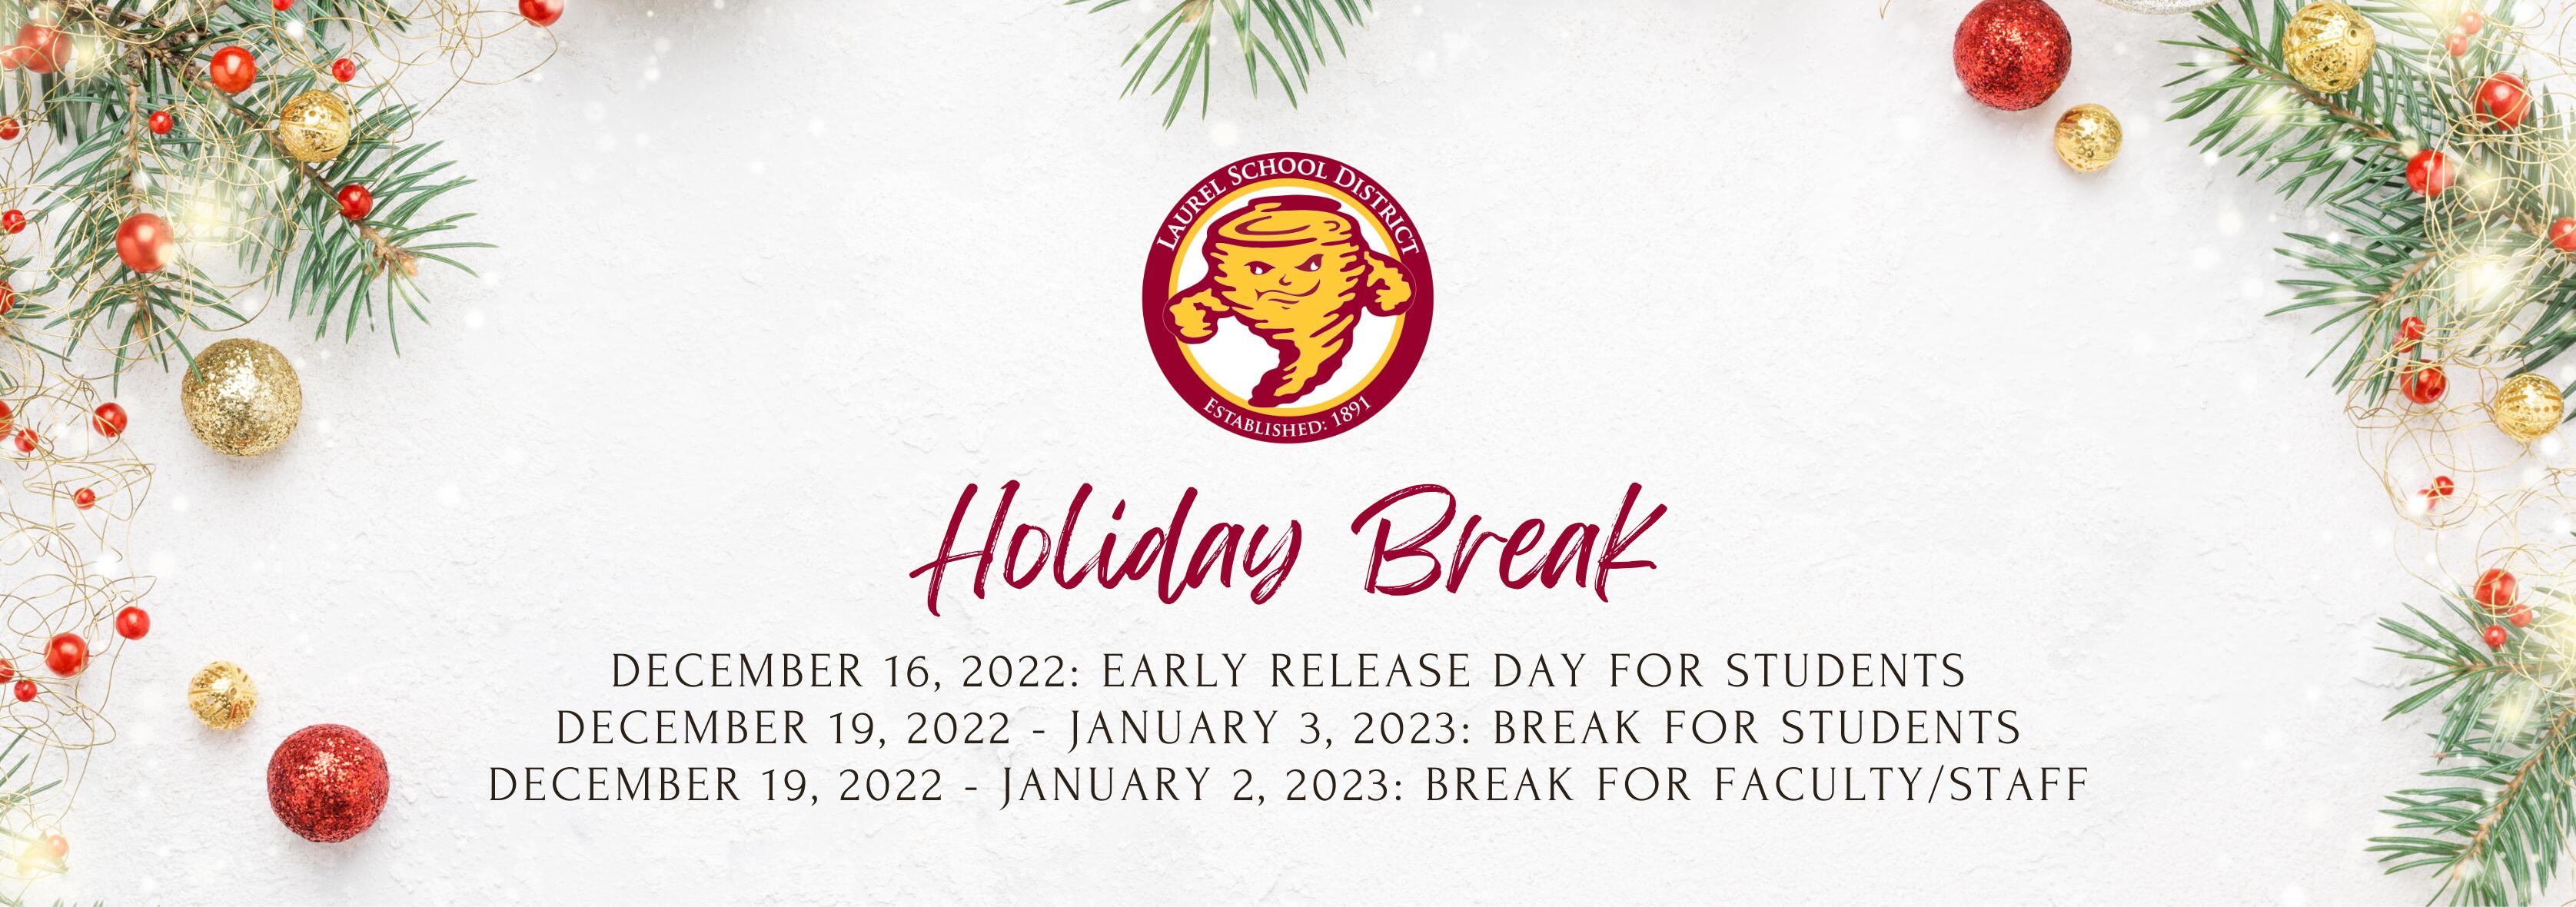 December 16, 2022: early release day for students December 19, 2022 - January 3, 2023: Break for Students December 19, 2022 - January 2, 2023: Break for Faculty/Staff and image of Christmas decorations and district logo with tornado